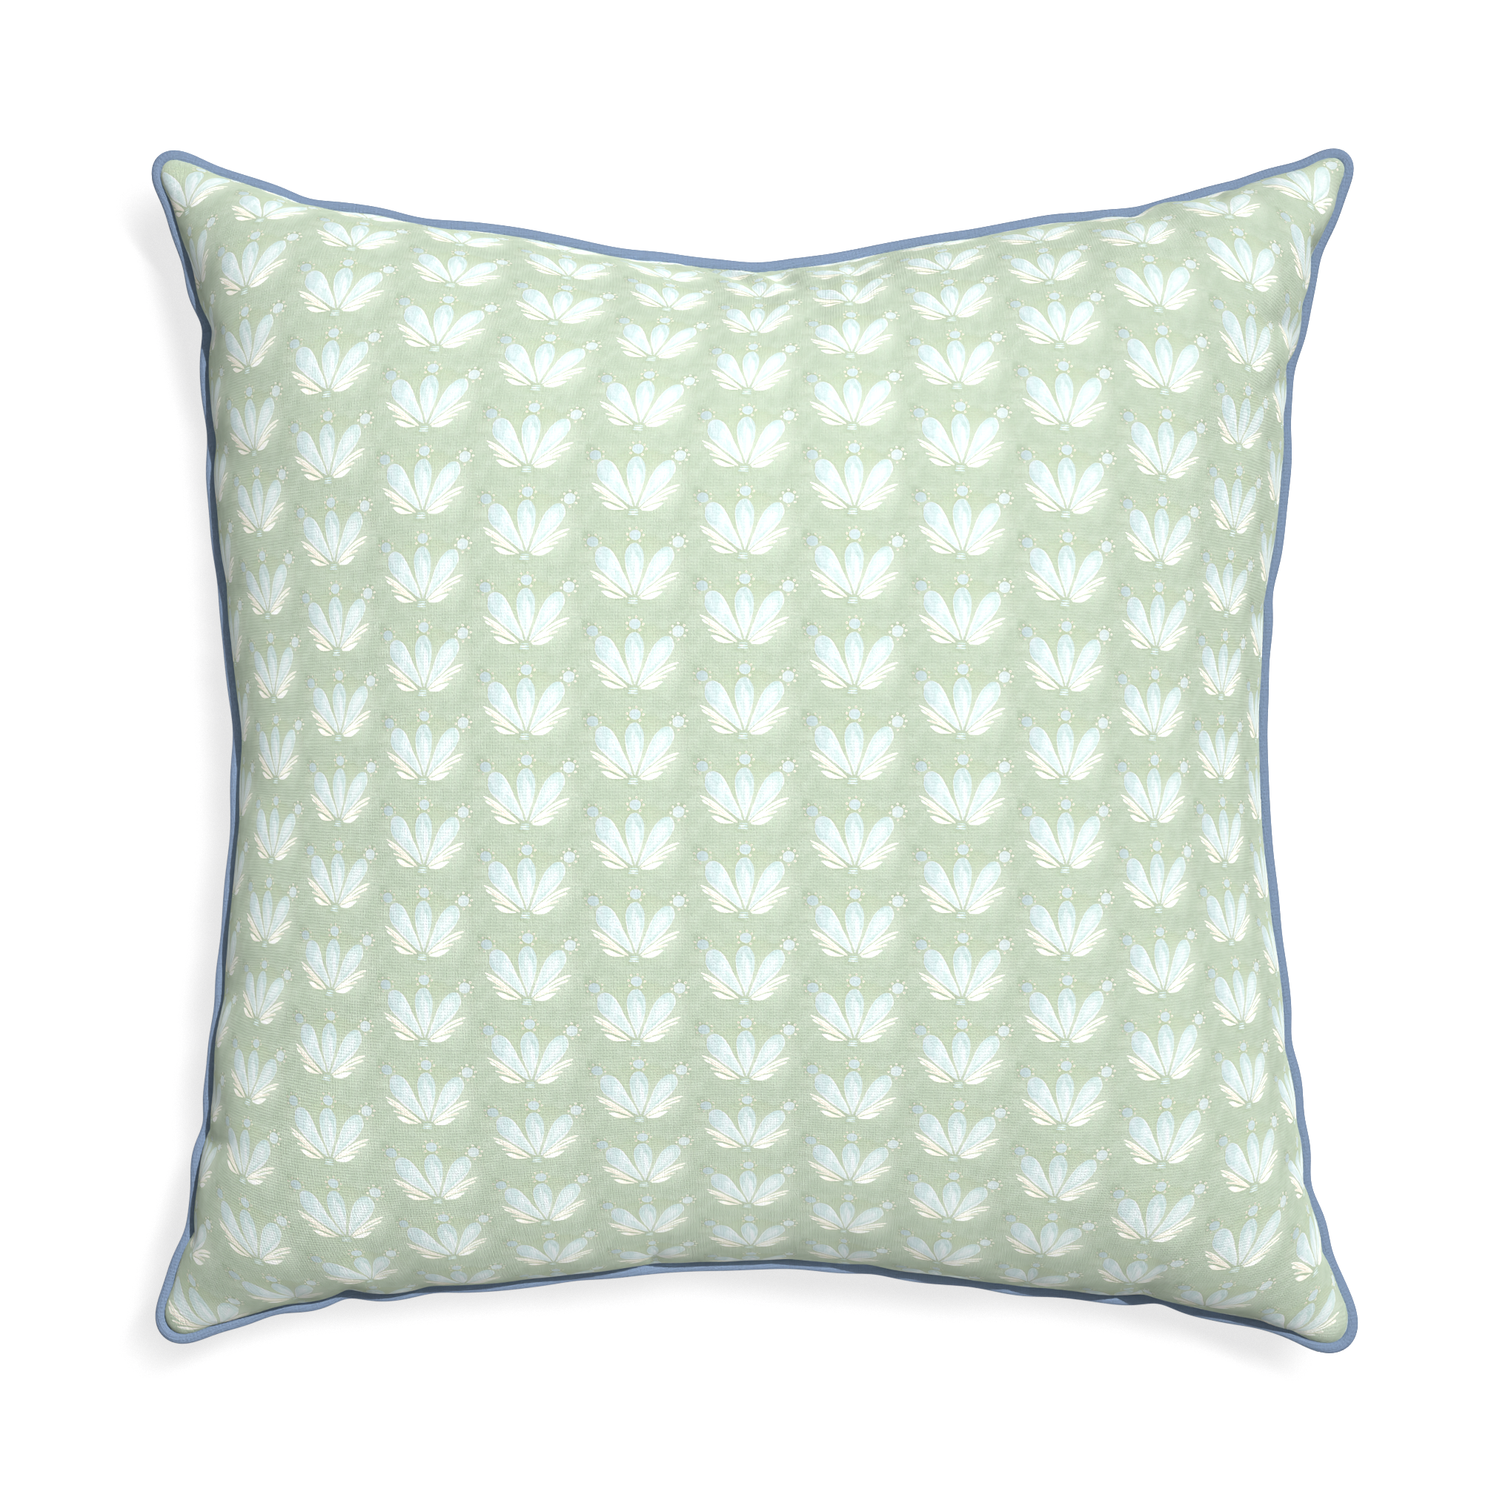 Euro-sham serena sea salt custom blue & green floral drop repeatpillow with sky piping on white background